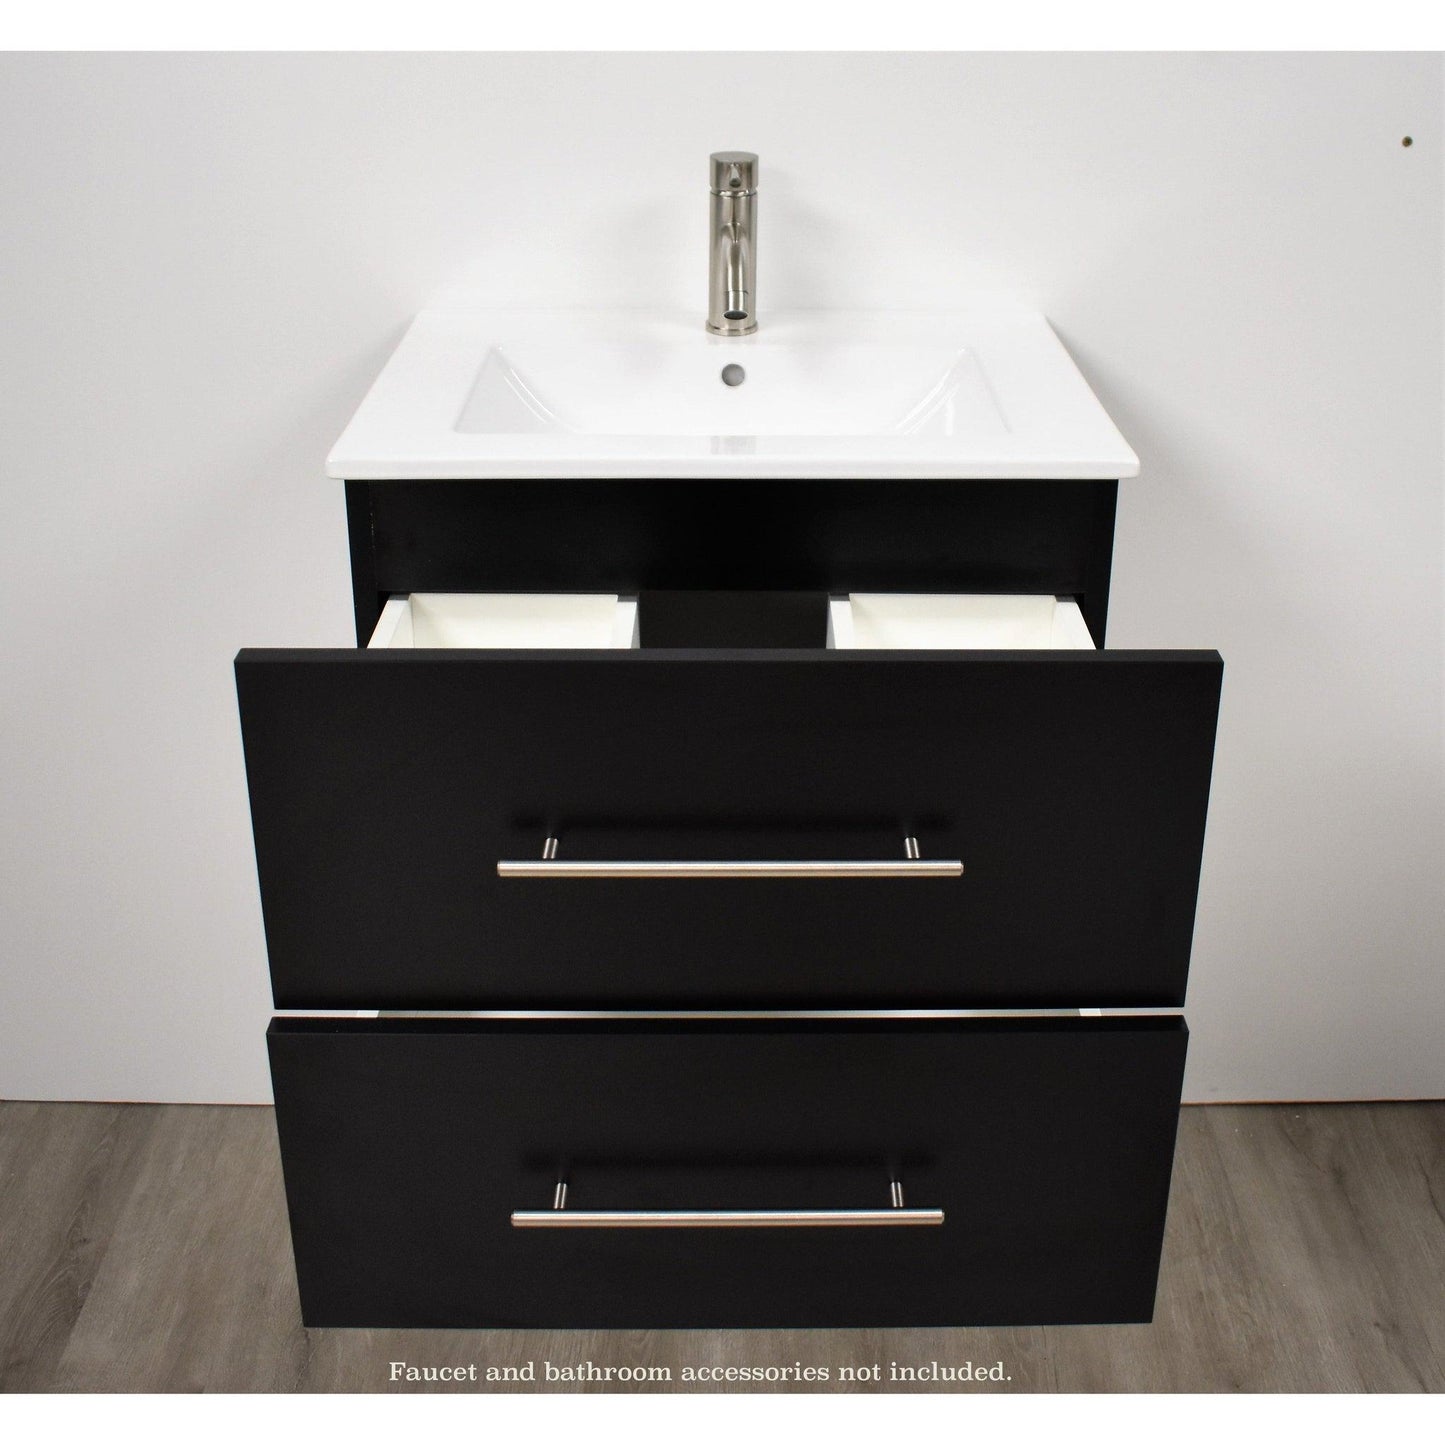 Volpa USA Napa 30" Black Wall-Mounted Floating Modern Bathroom Vanity With Integrated Ceramic Top and Satin Nickel Round Handles